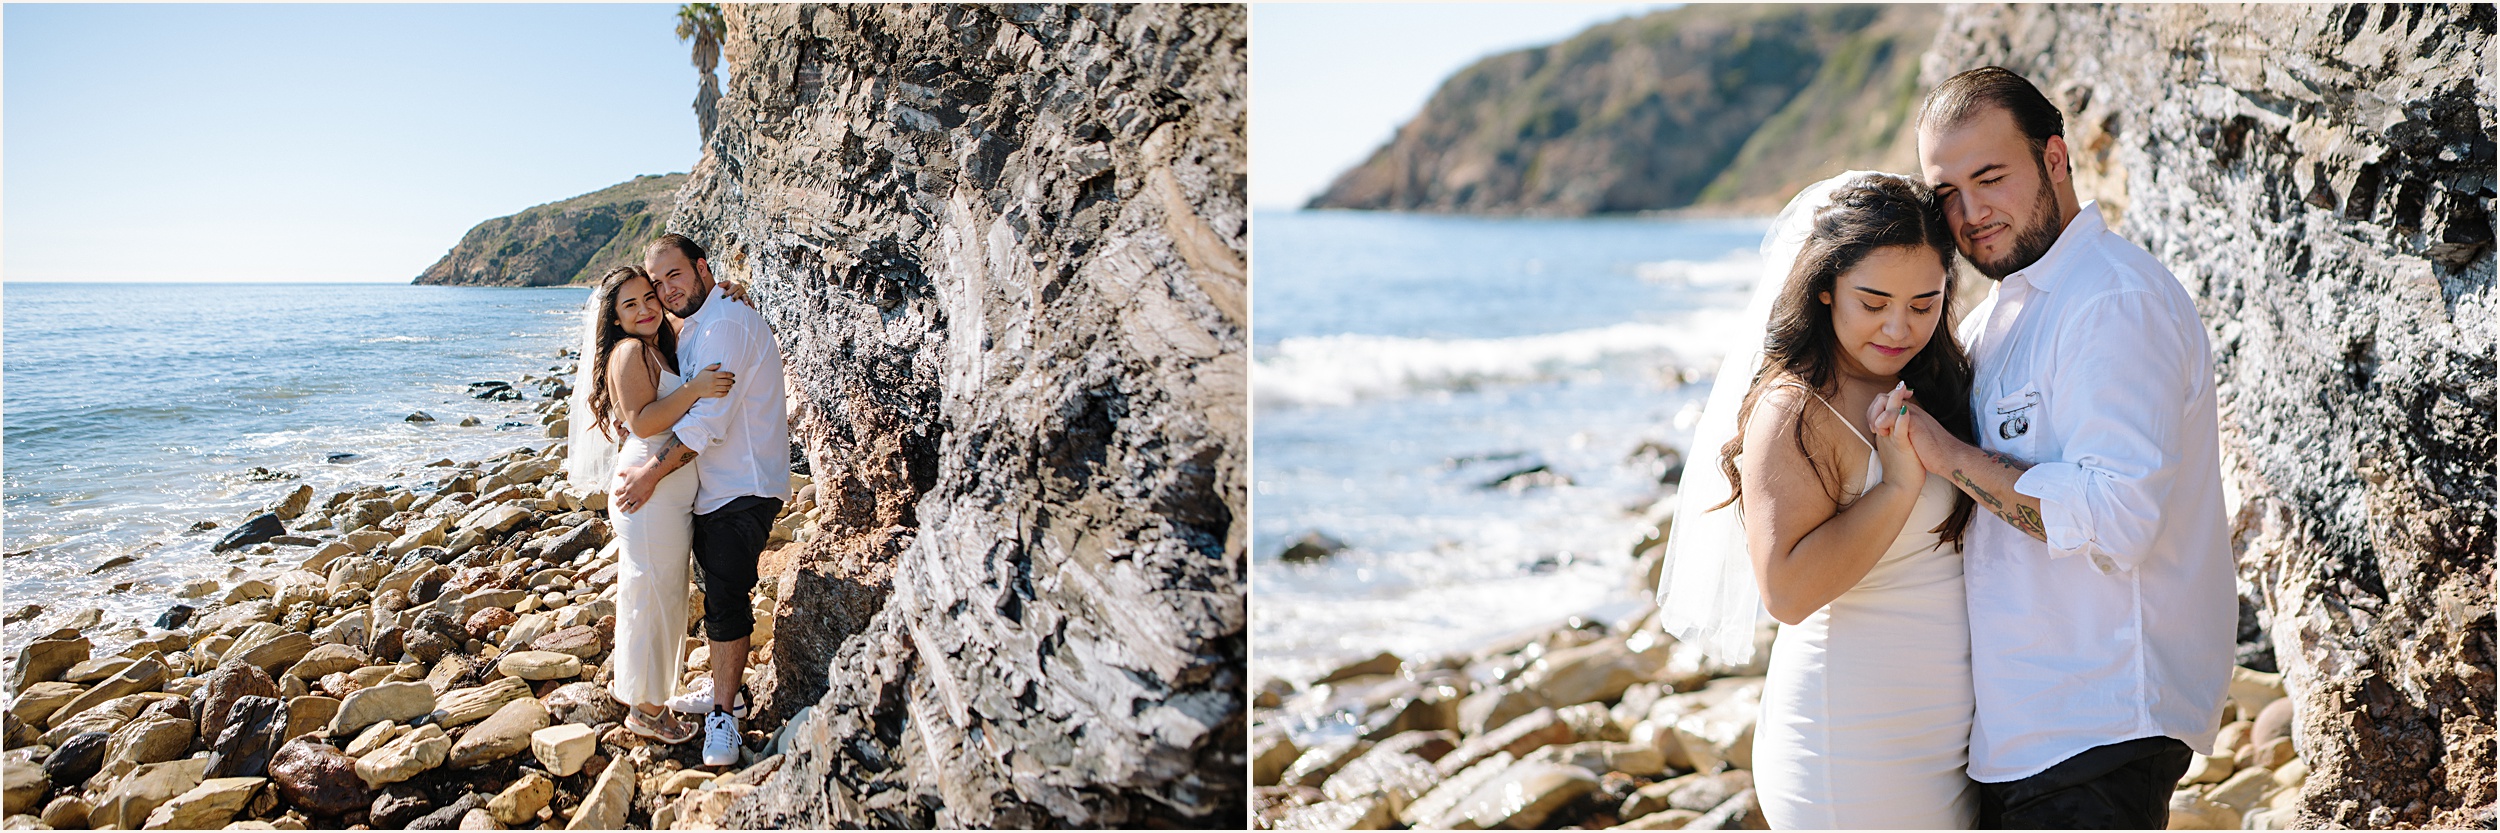 Andrea-and-Anthony-31 Intimate Elopement at Zuma Beach in Malibu, CA | Andrea & Anthony￼